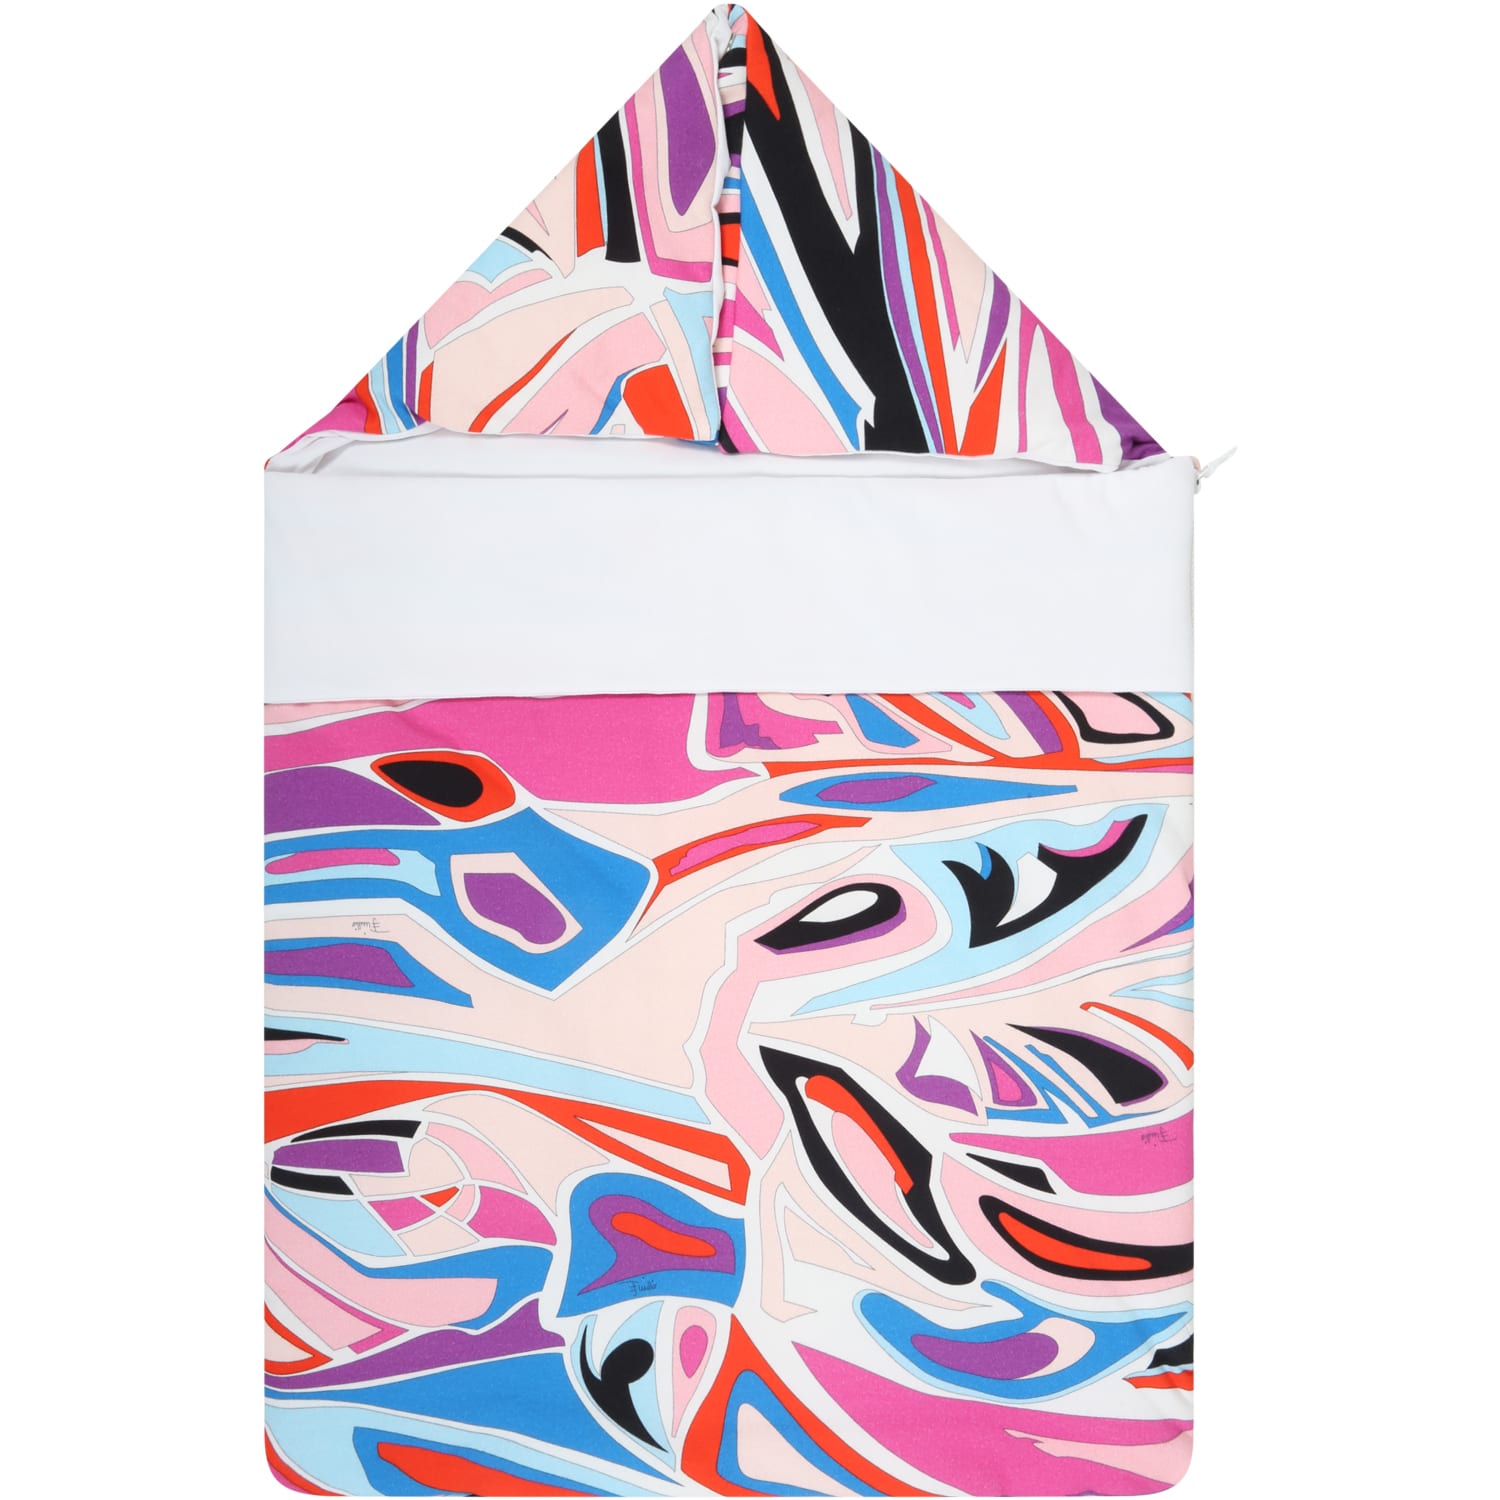 Emilio Pucci Multicolor Sleeping Bag For Baby Girl With Logo